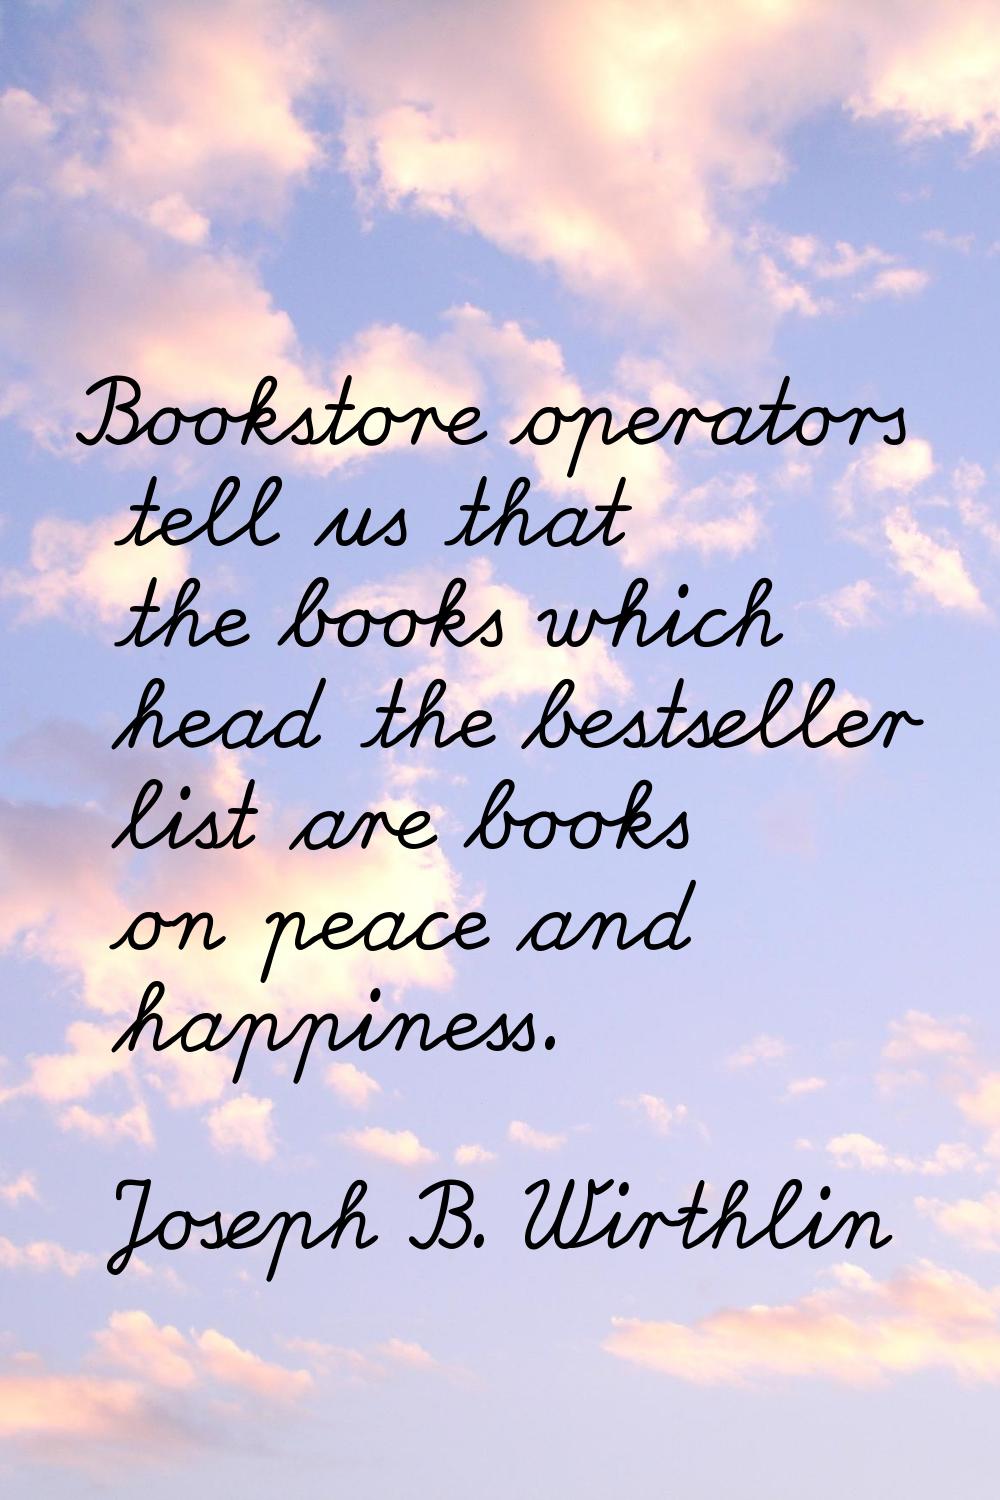 Bookstore operators tell us that the books which head the bestseller list are books on peace and ha